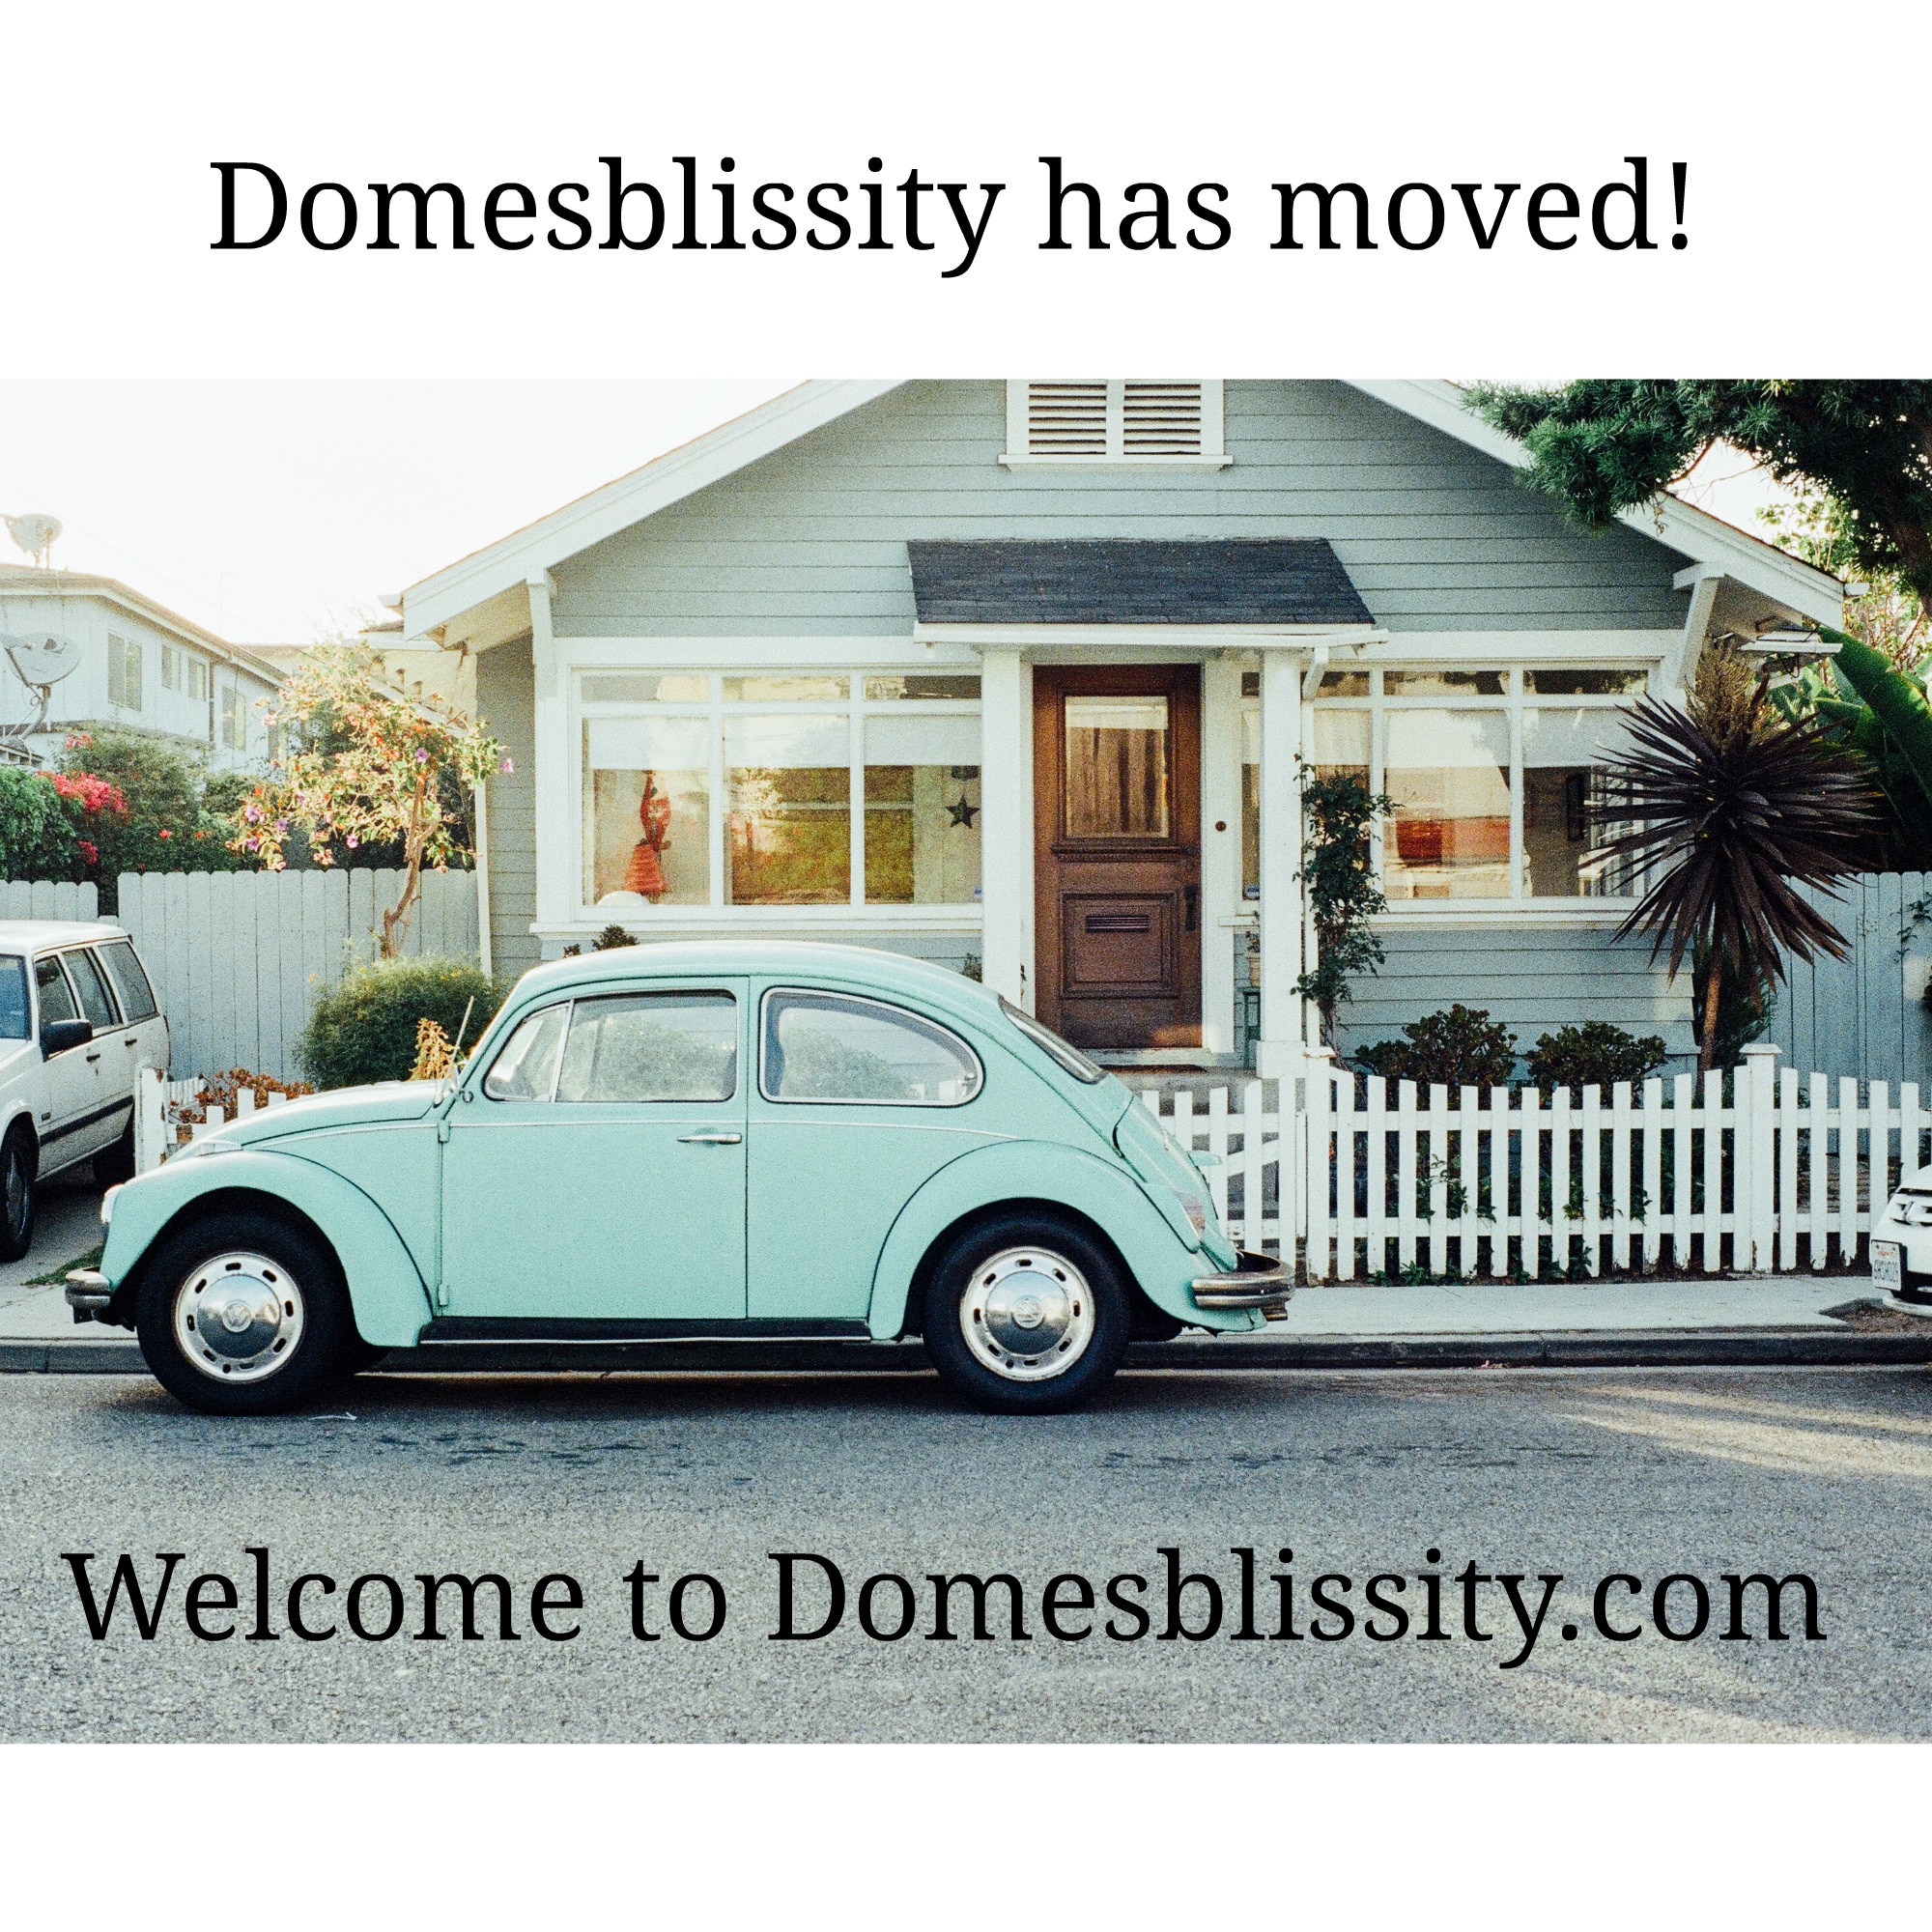 Welcome to Domesblissity.com!